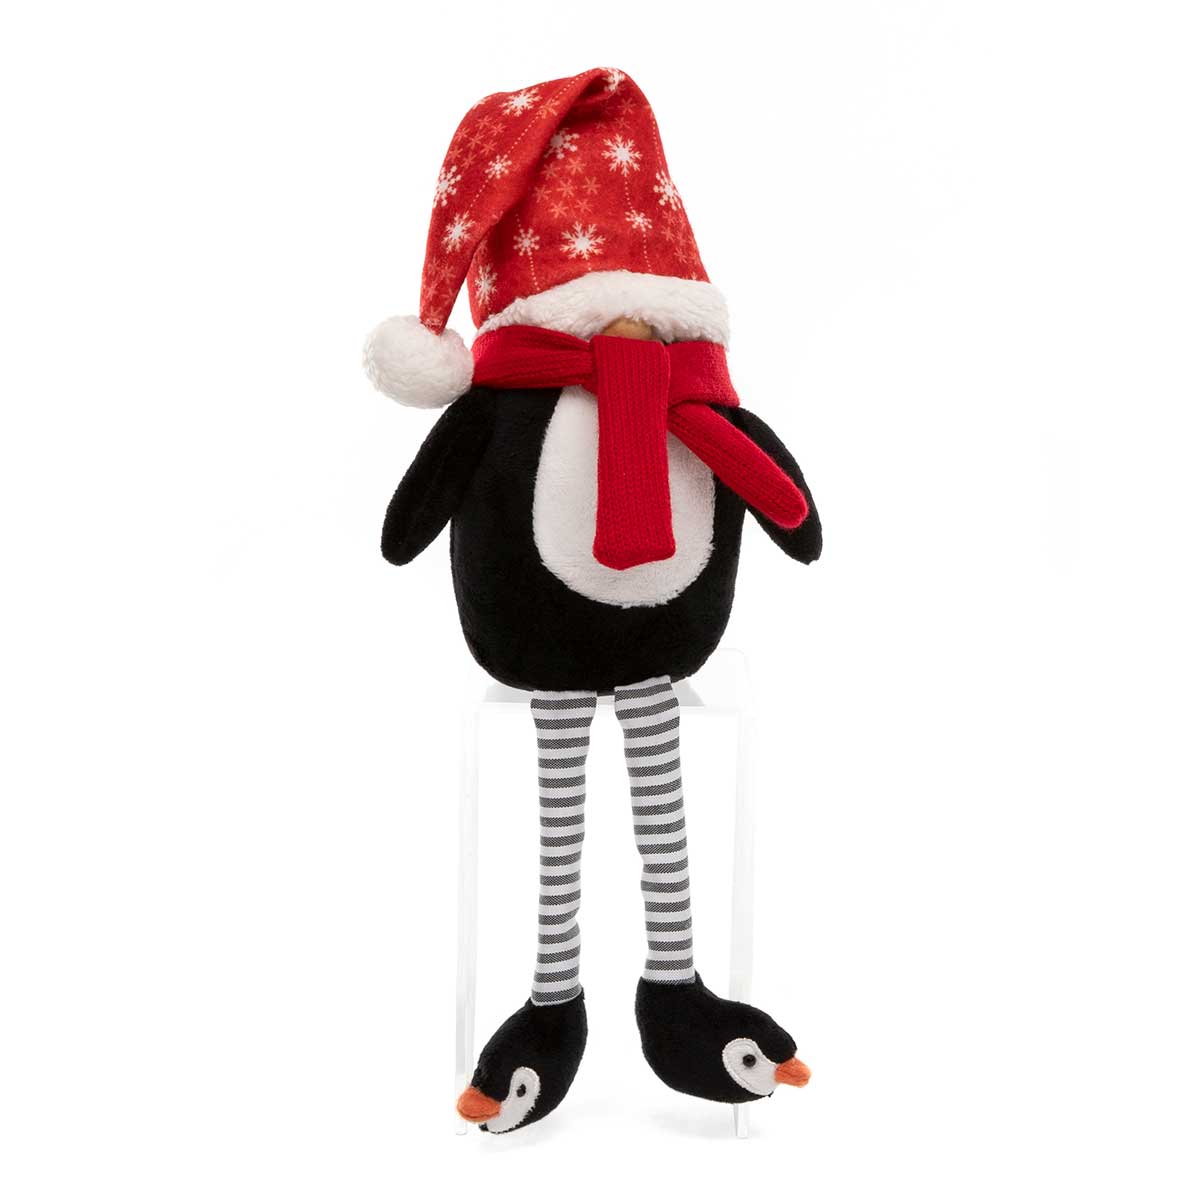 PENGUIN GNOME WITH RED/WHITE WITH FLOPPY LEGS